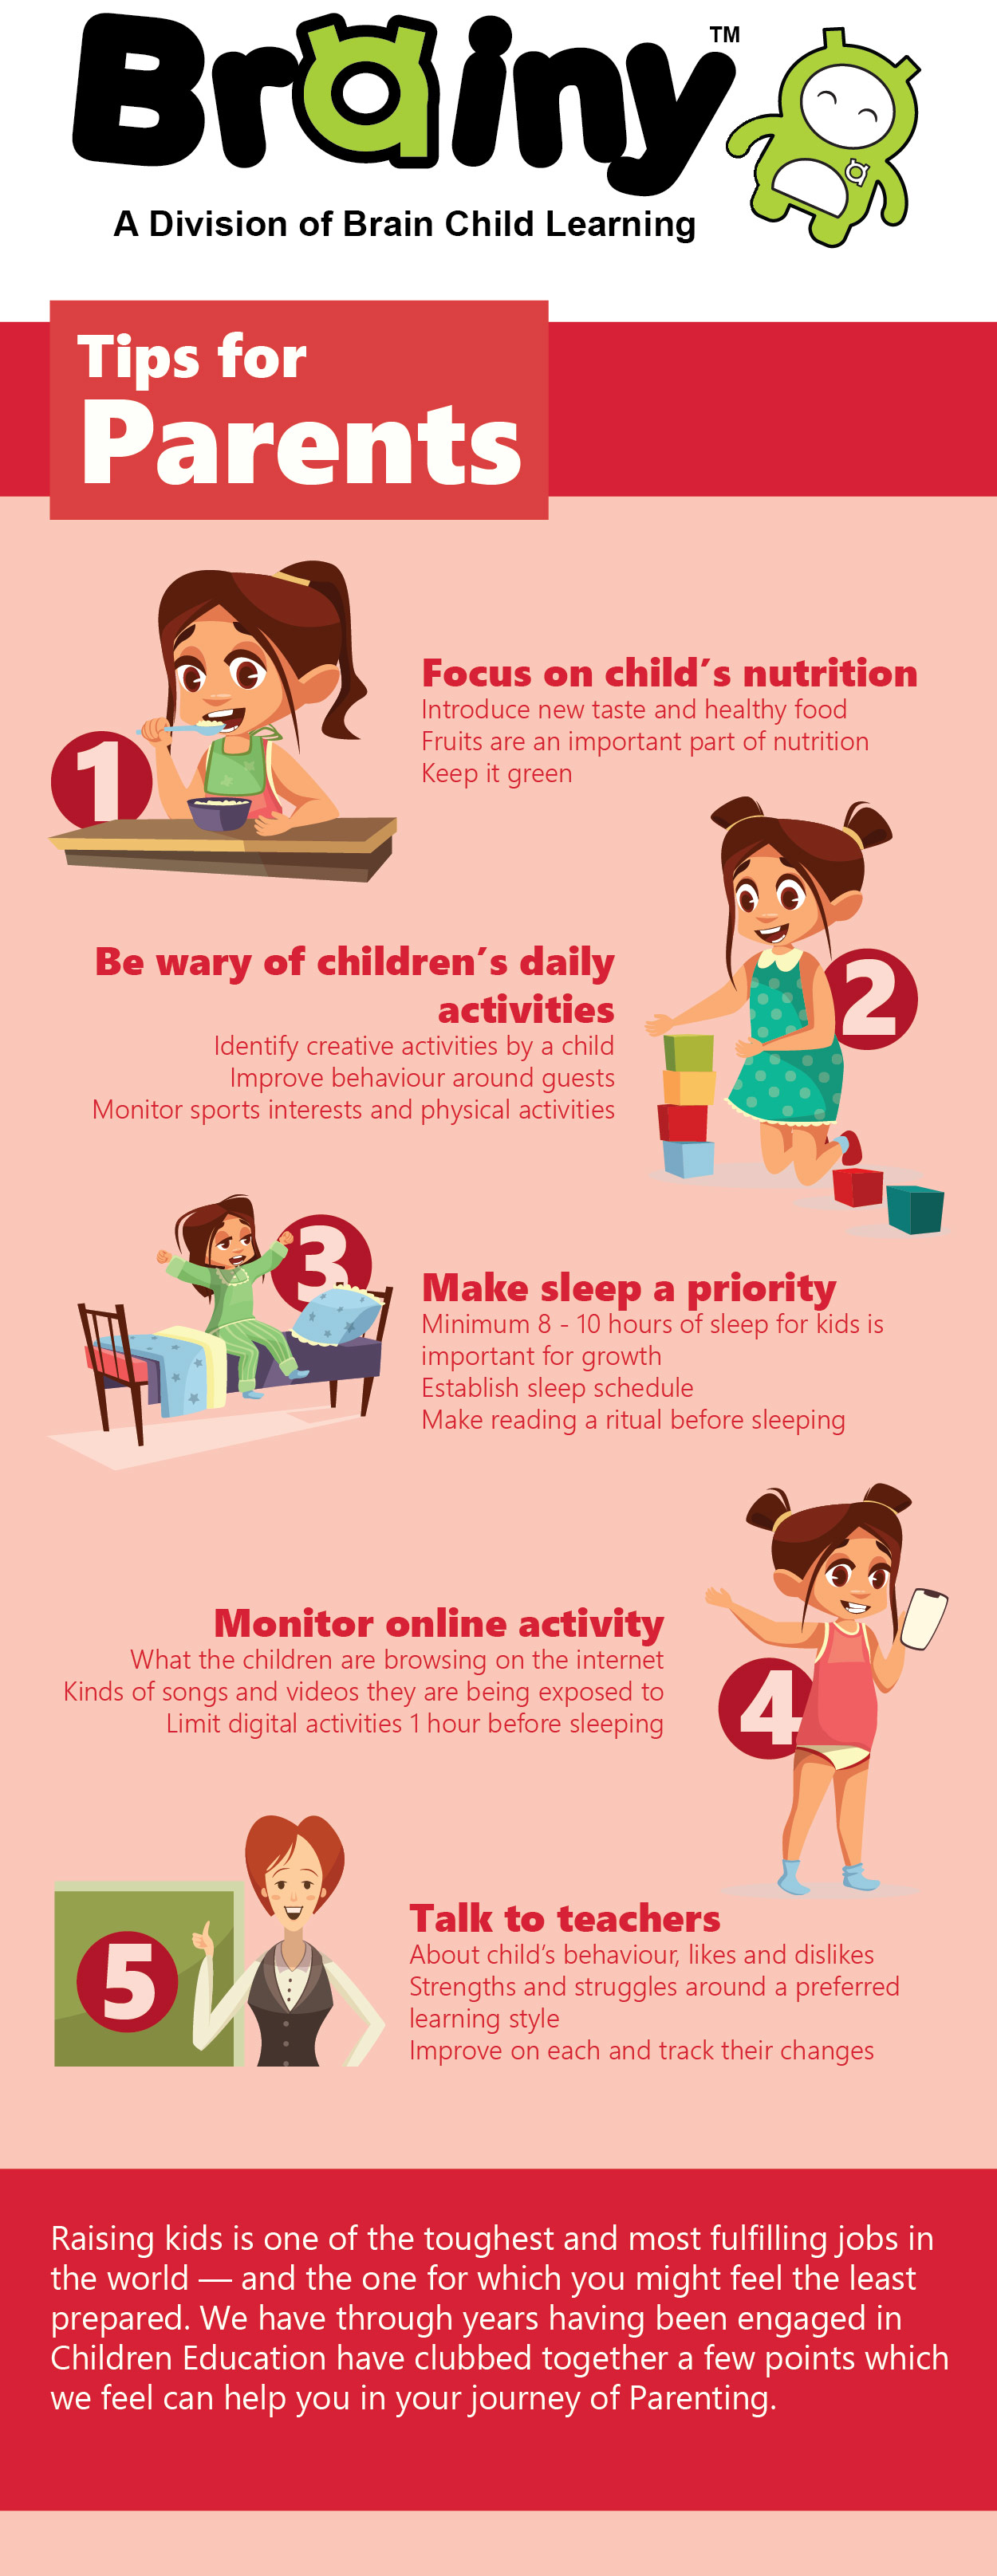 Tips For Parents For Better Parenting [Infographic]